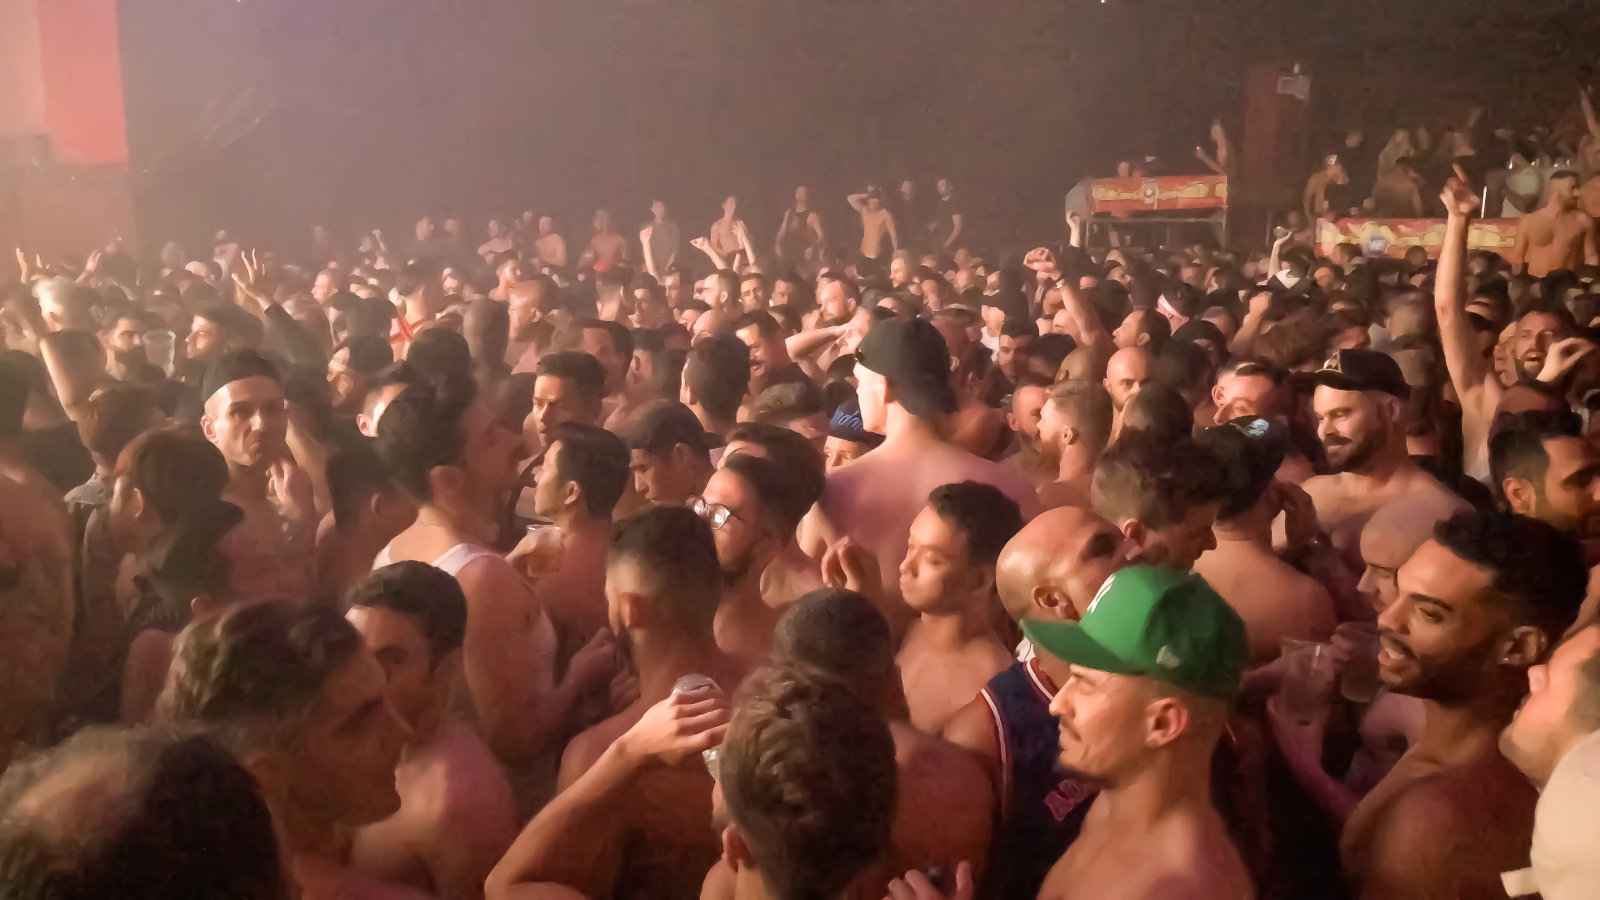 Theatron in Bogota is the biggest gay club in the whole world and incredible to experience!